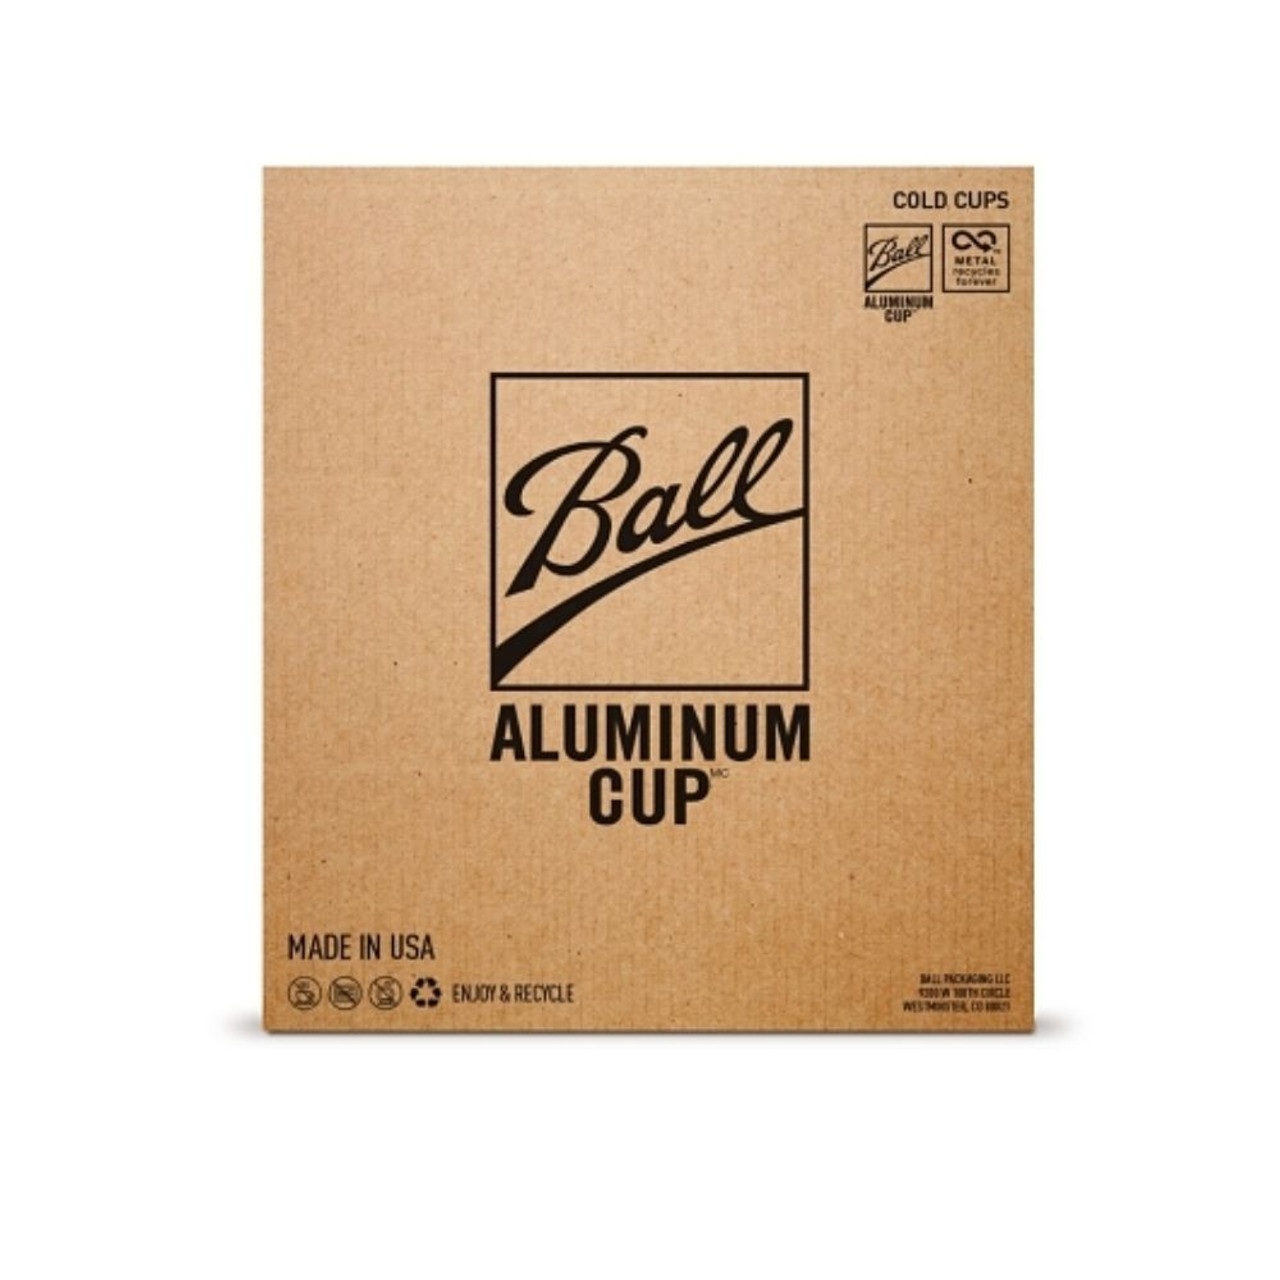 Ball Aluminum Cup, Disposable Recyclable Cold-Drink Cups, 16 oz. Cups, 24  Count